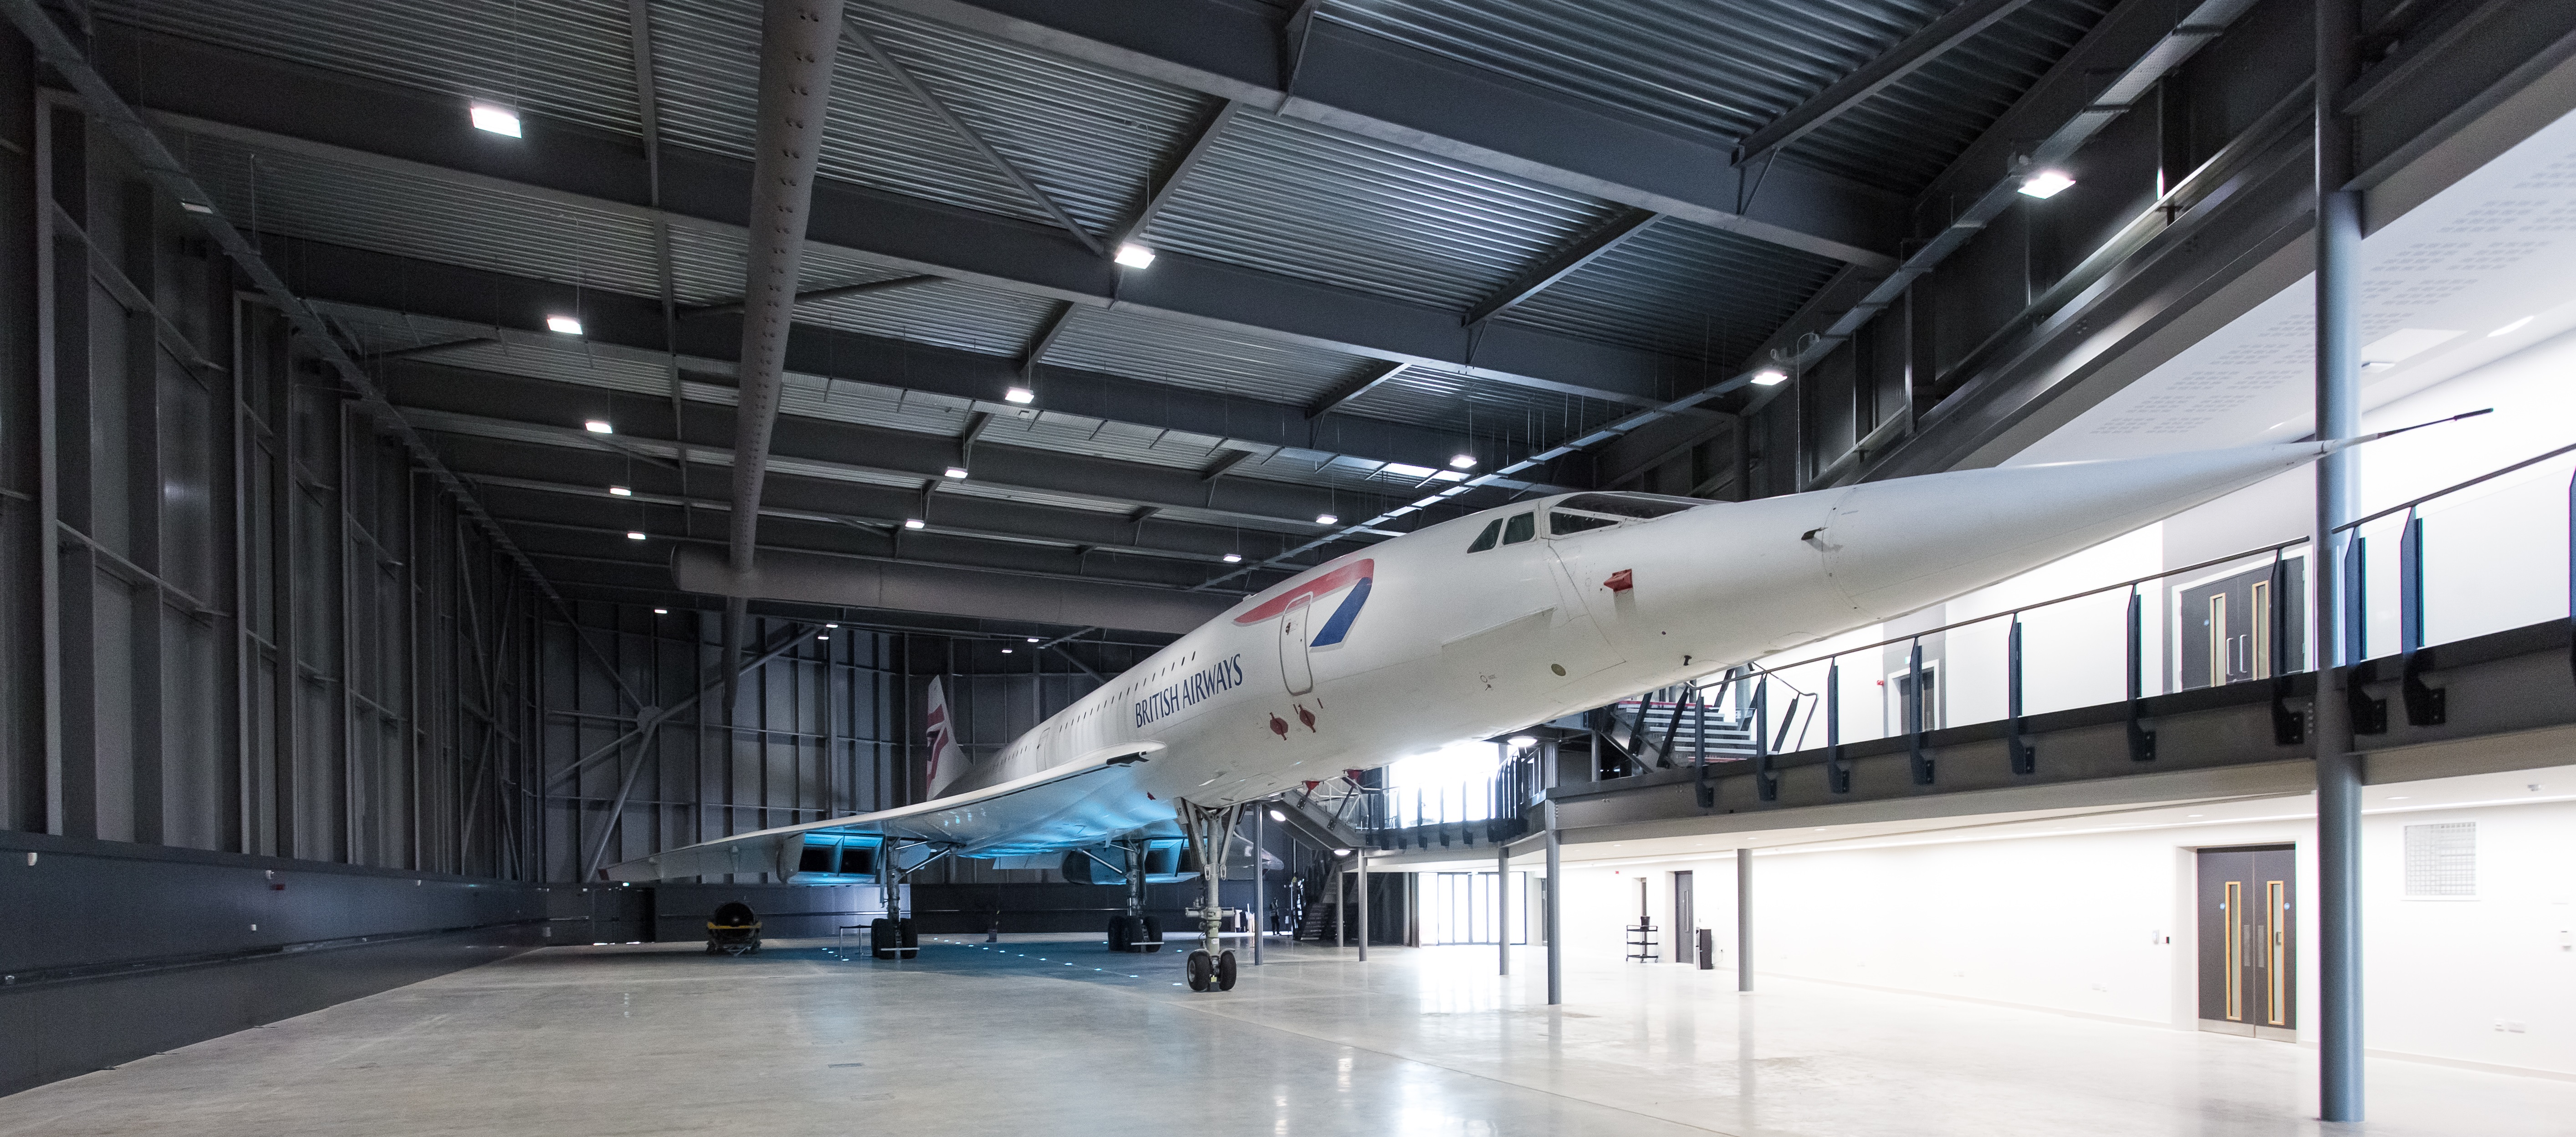 General 5656x2496 Concorde Bristol aircraft vehicle airline french aircraft British aircraft